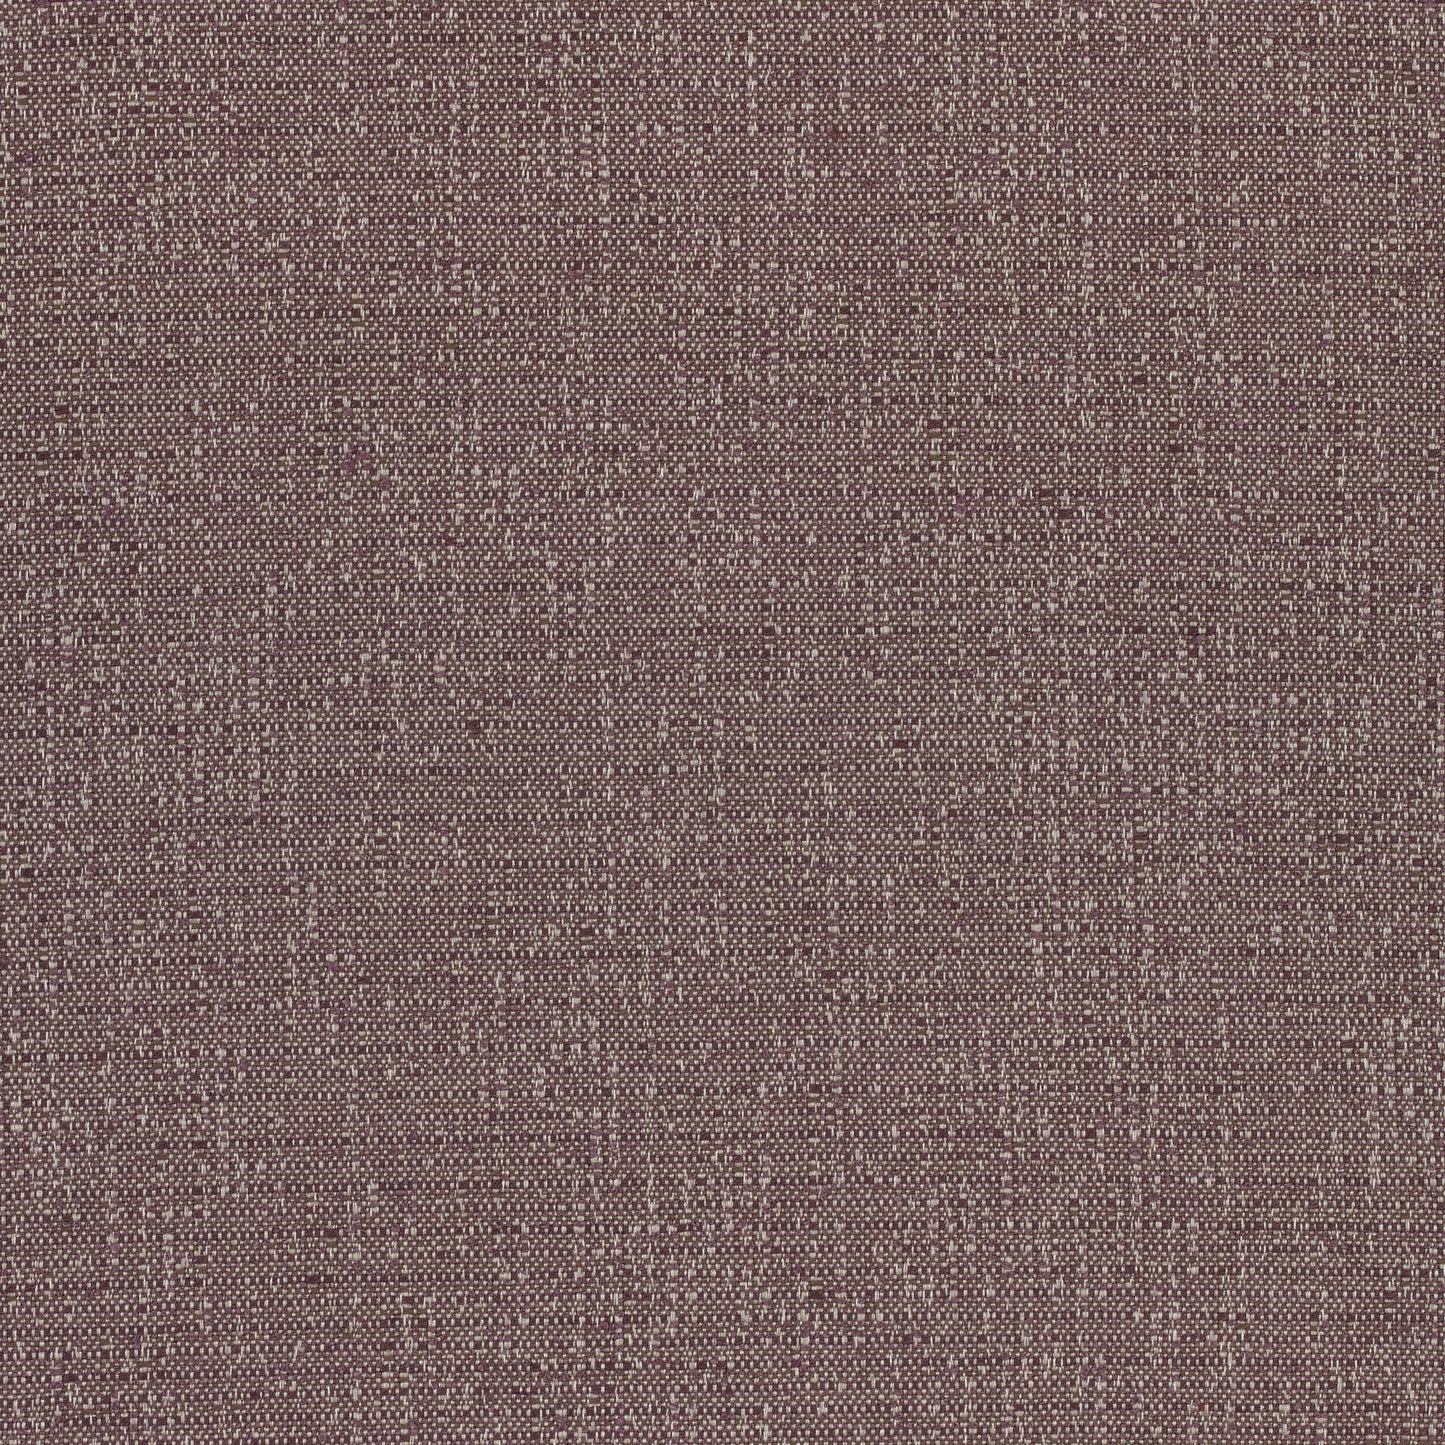 Purchase Thibaut Fabric SKU W74060 pattern name Everly color Plum